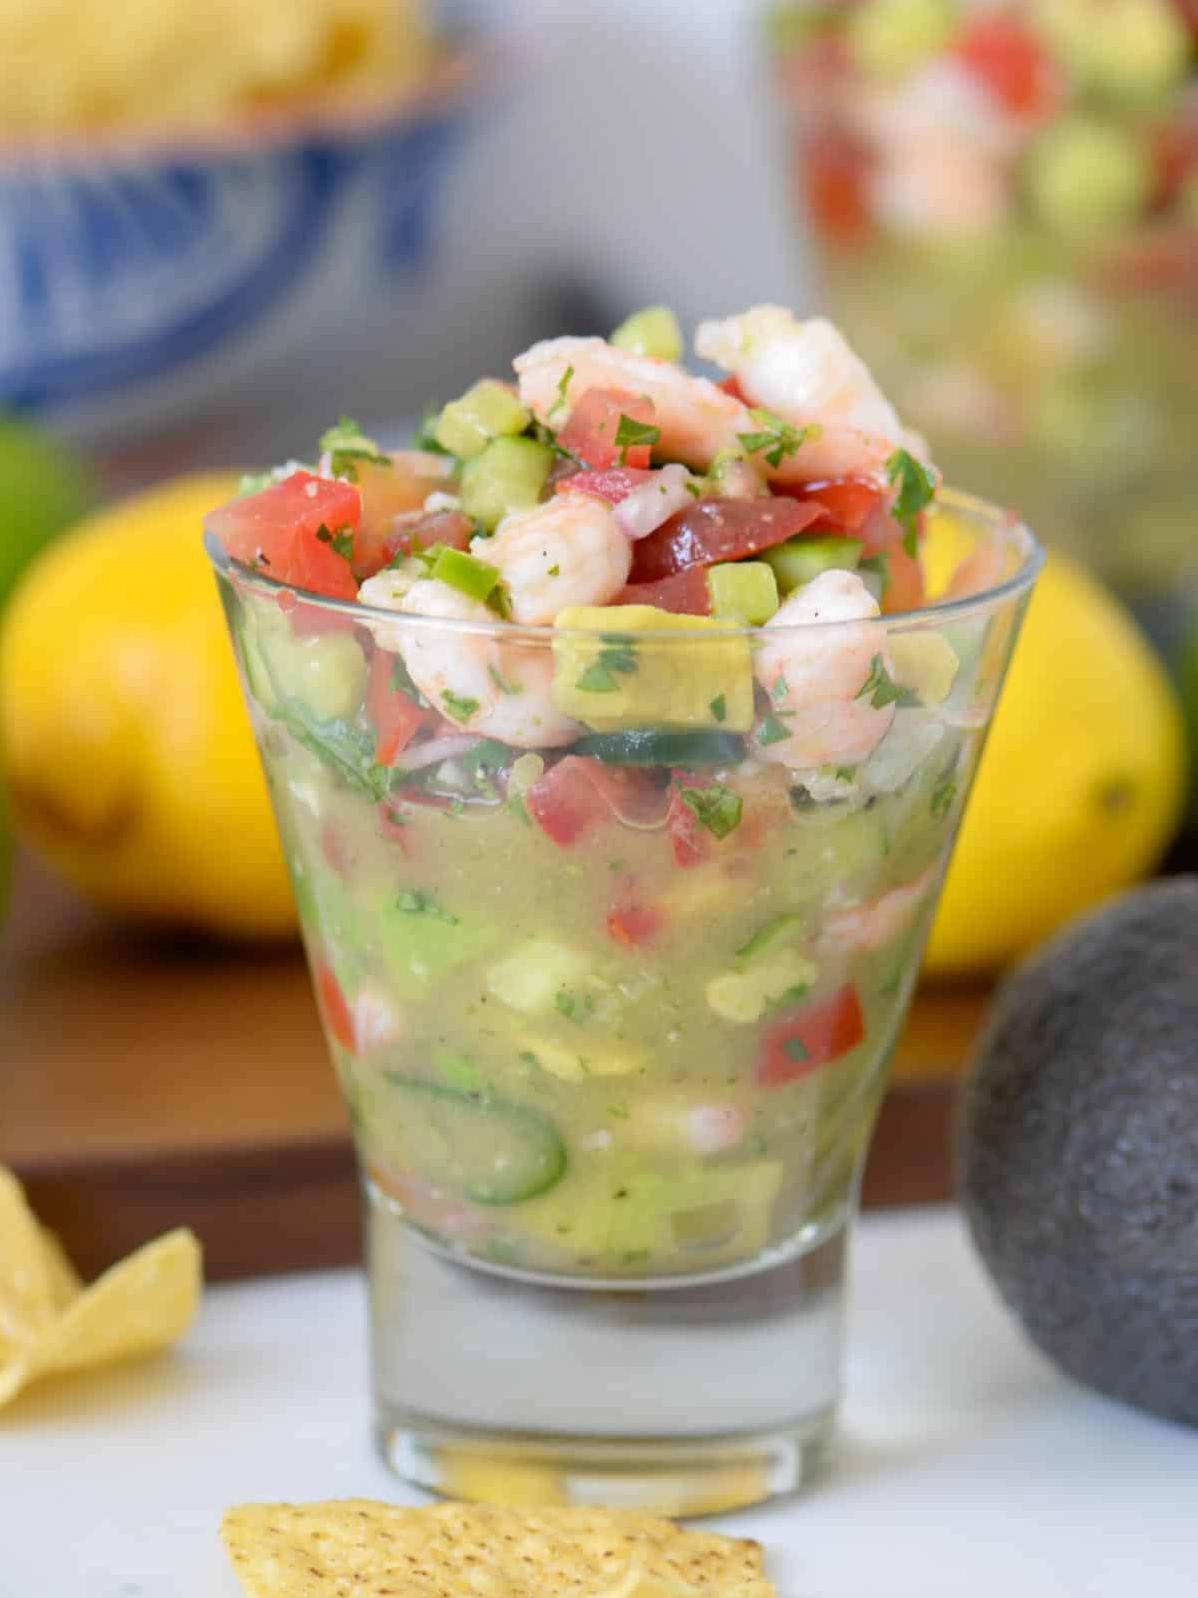  Get ready to wow your guests with this colorful and delicious Party Shrimp Ceviche.